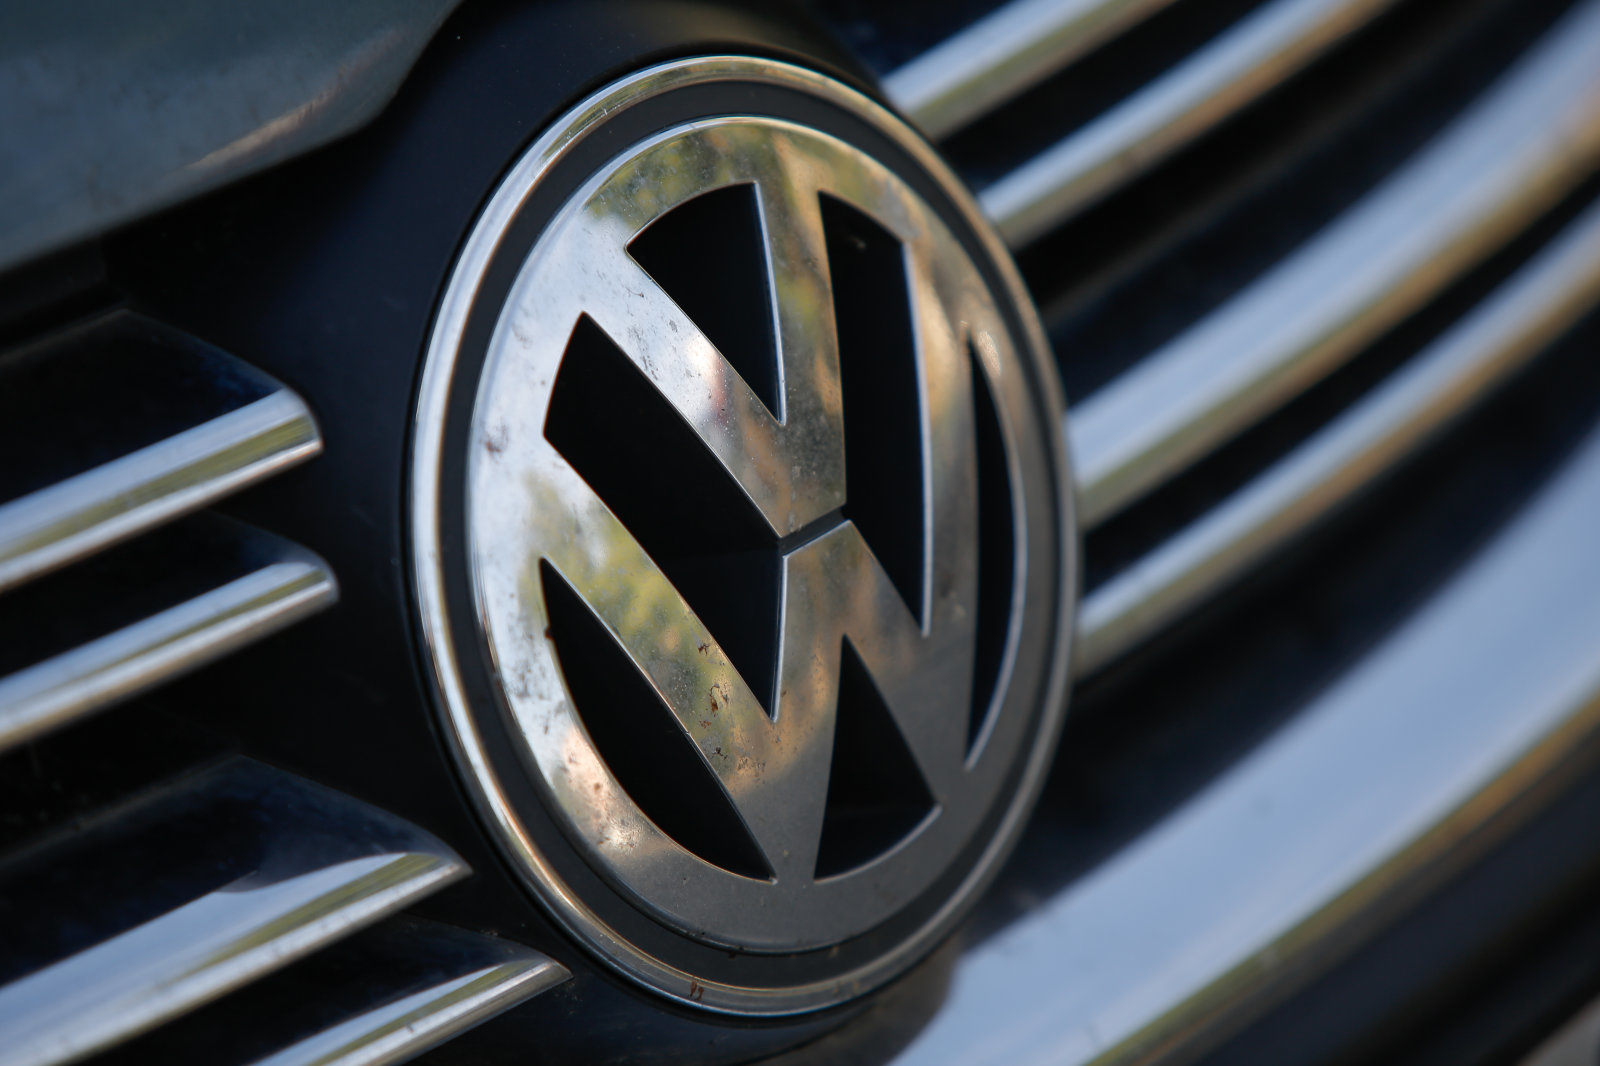 VW engineer sentenced to 40 months in prison for emissions cheating